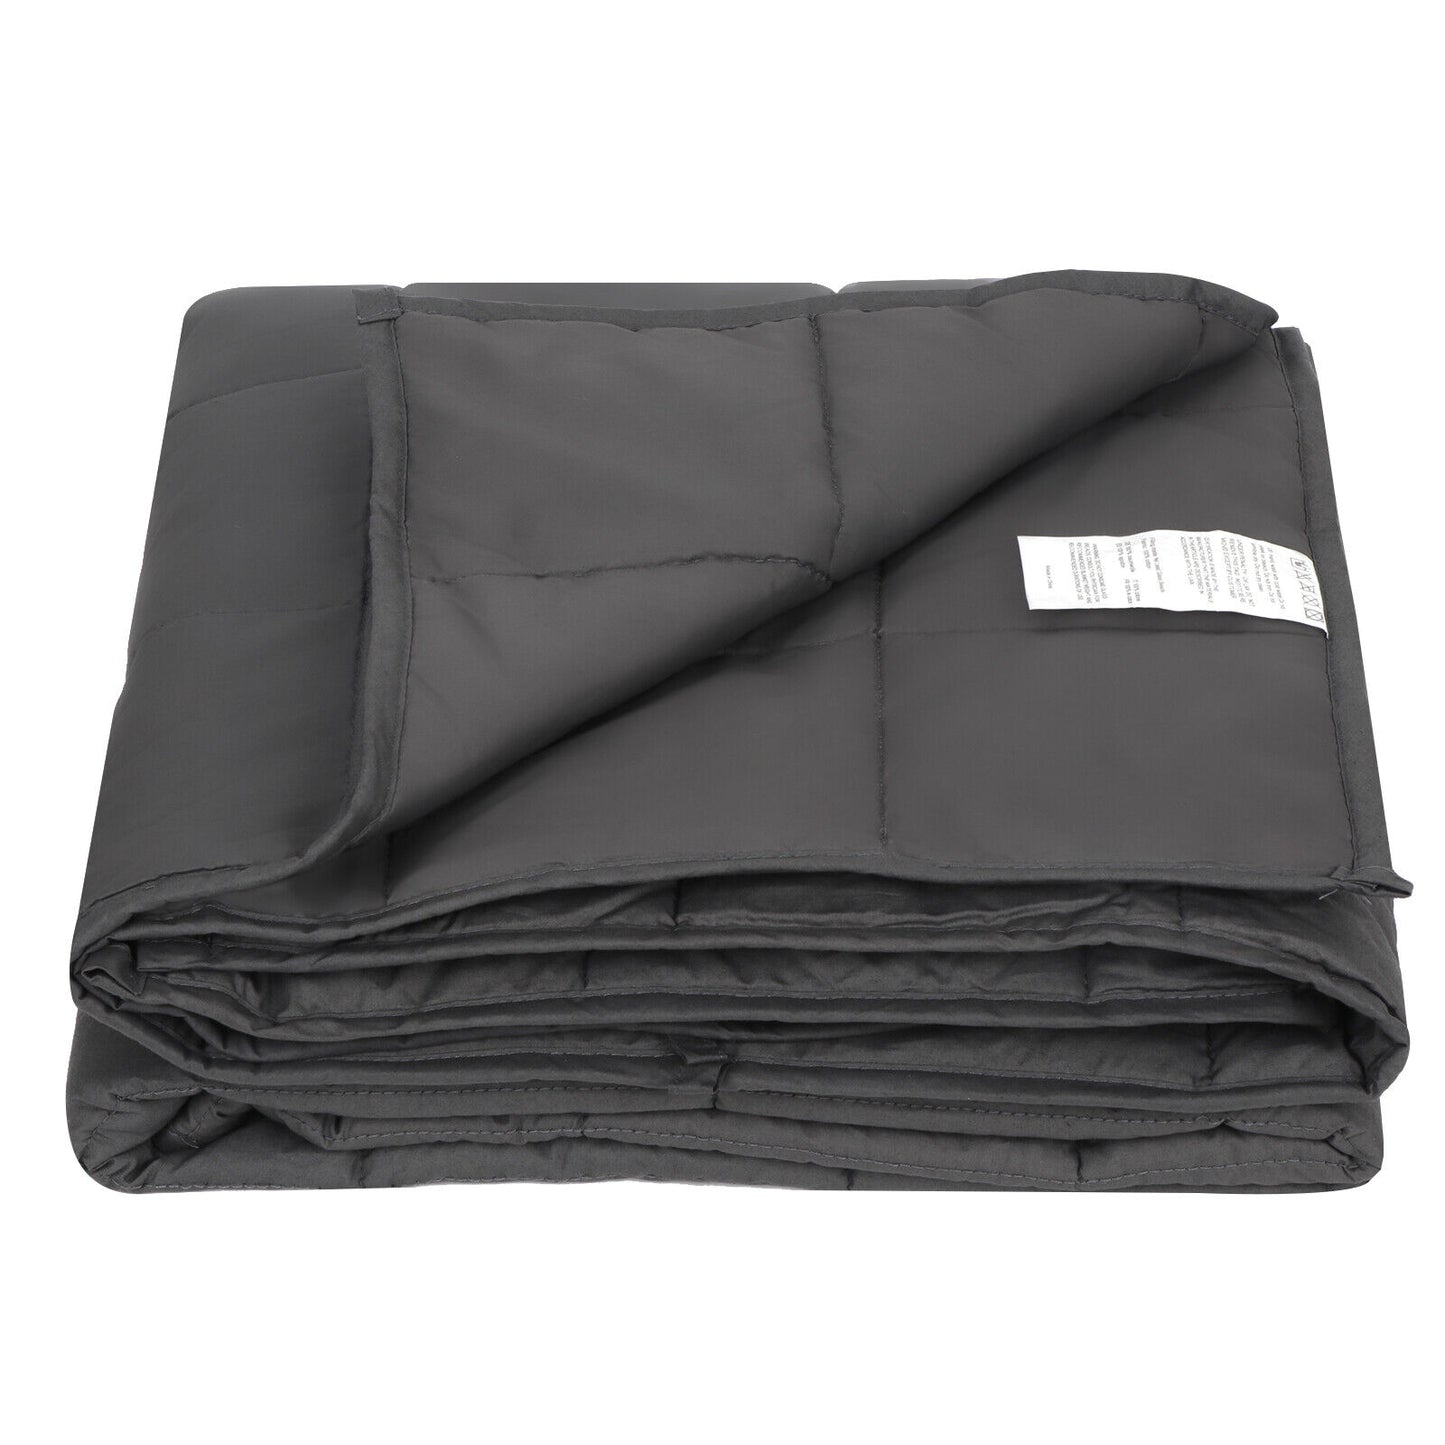 Weighted Blanket Twin Size Calm Down 48 x 72" Full Twin Size 15lbs Promote Sleep